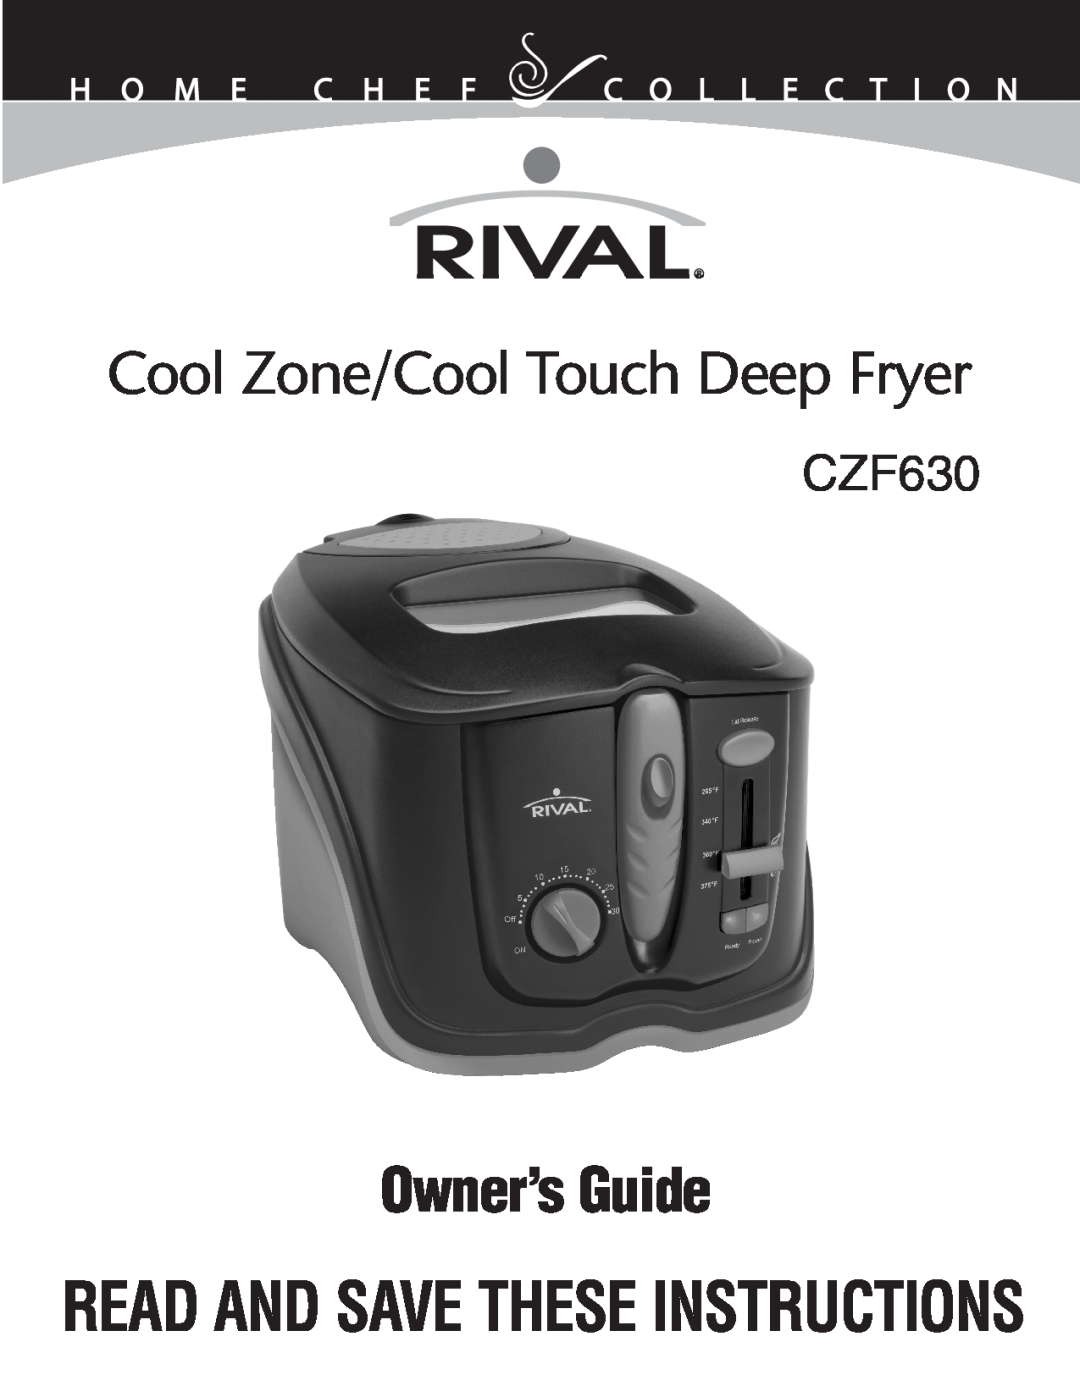 Rival CZF630 manual Cool Zone/Cool Touch Deep Fryer, Owner’sGuide, Read And Savetheseinstructions 